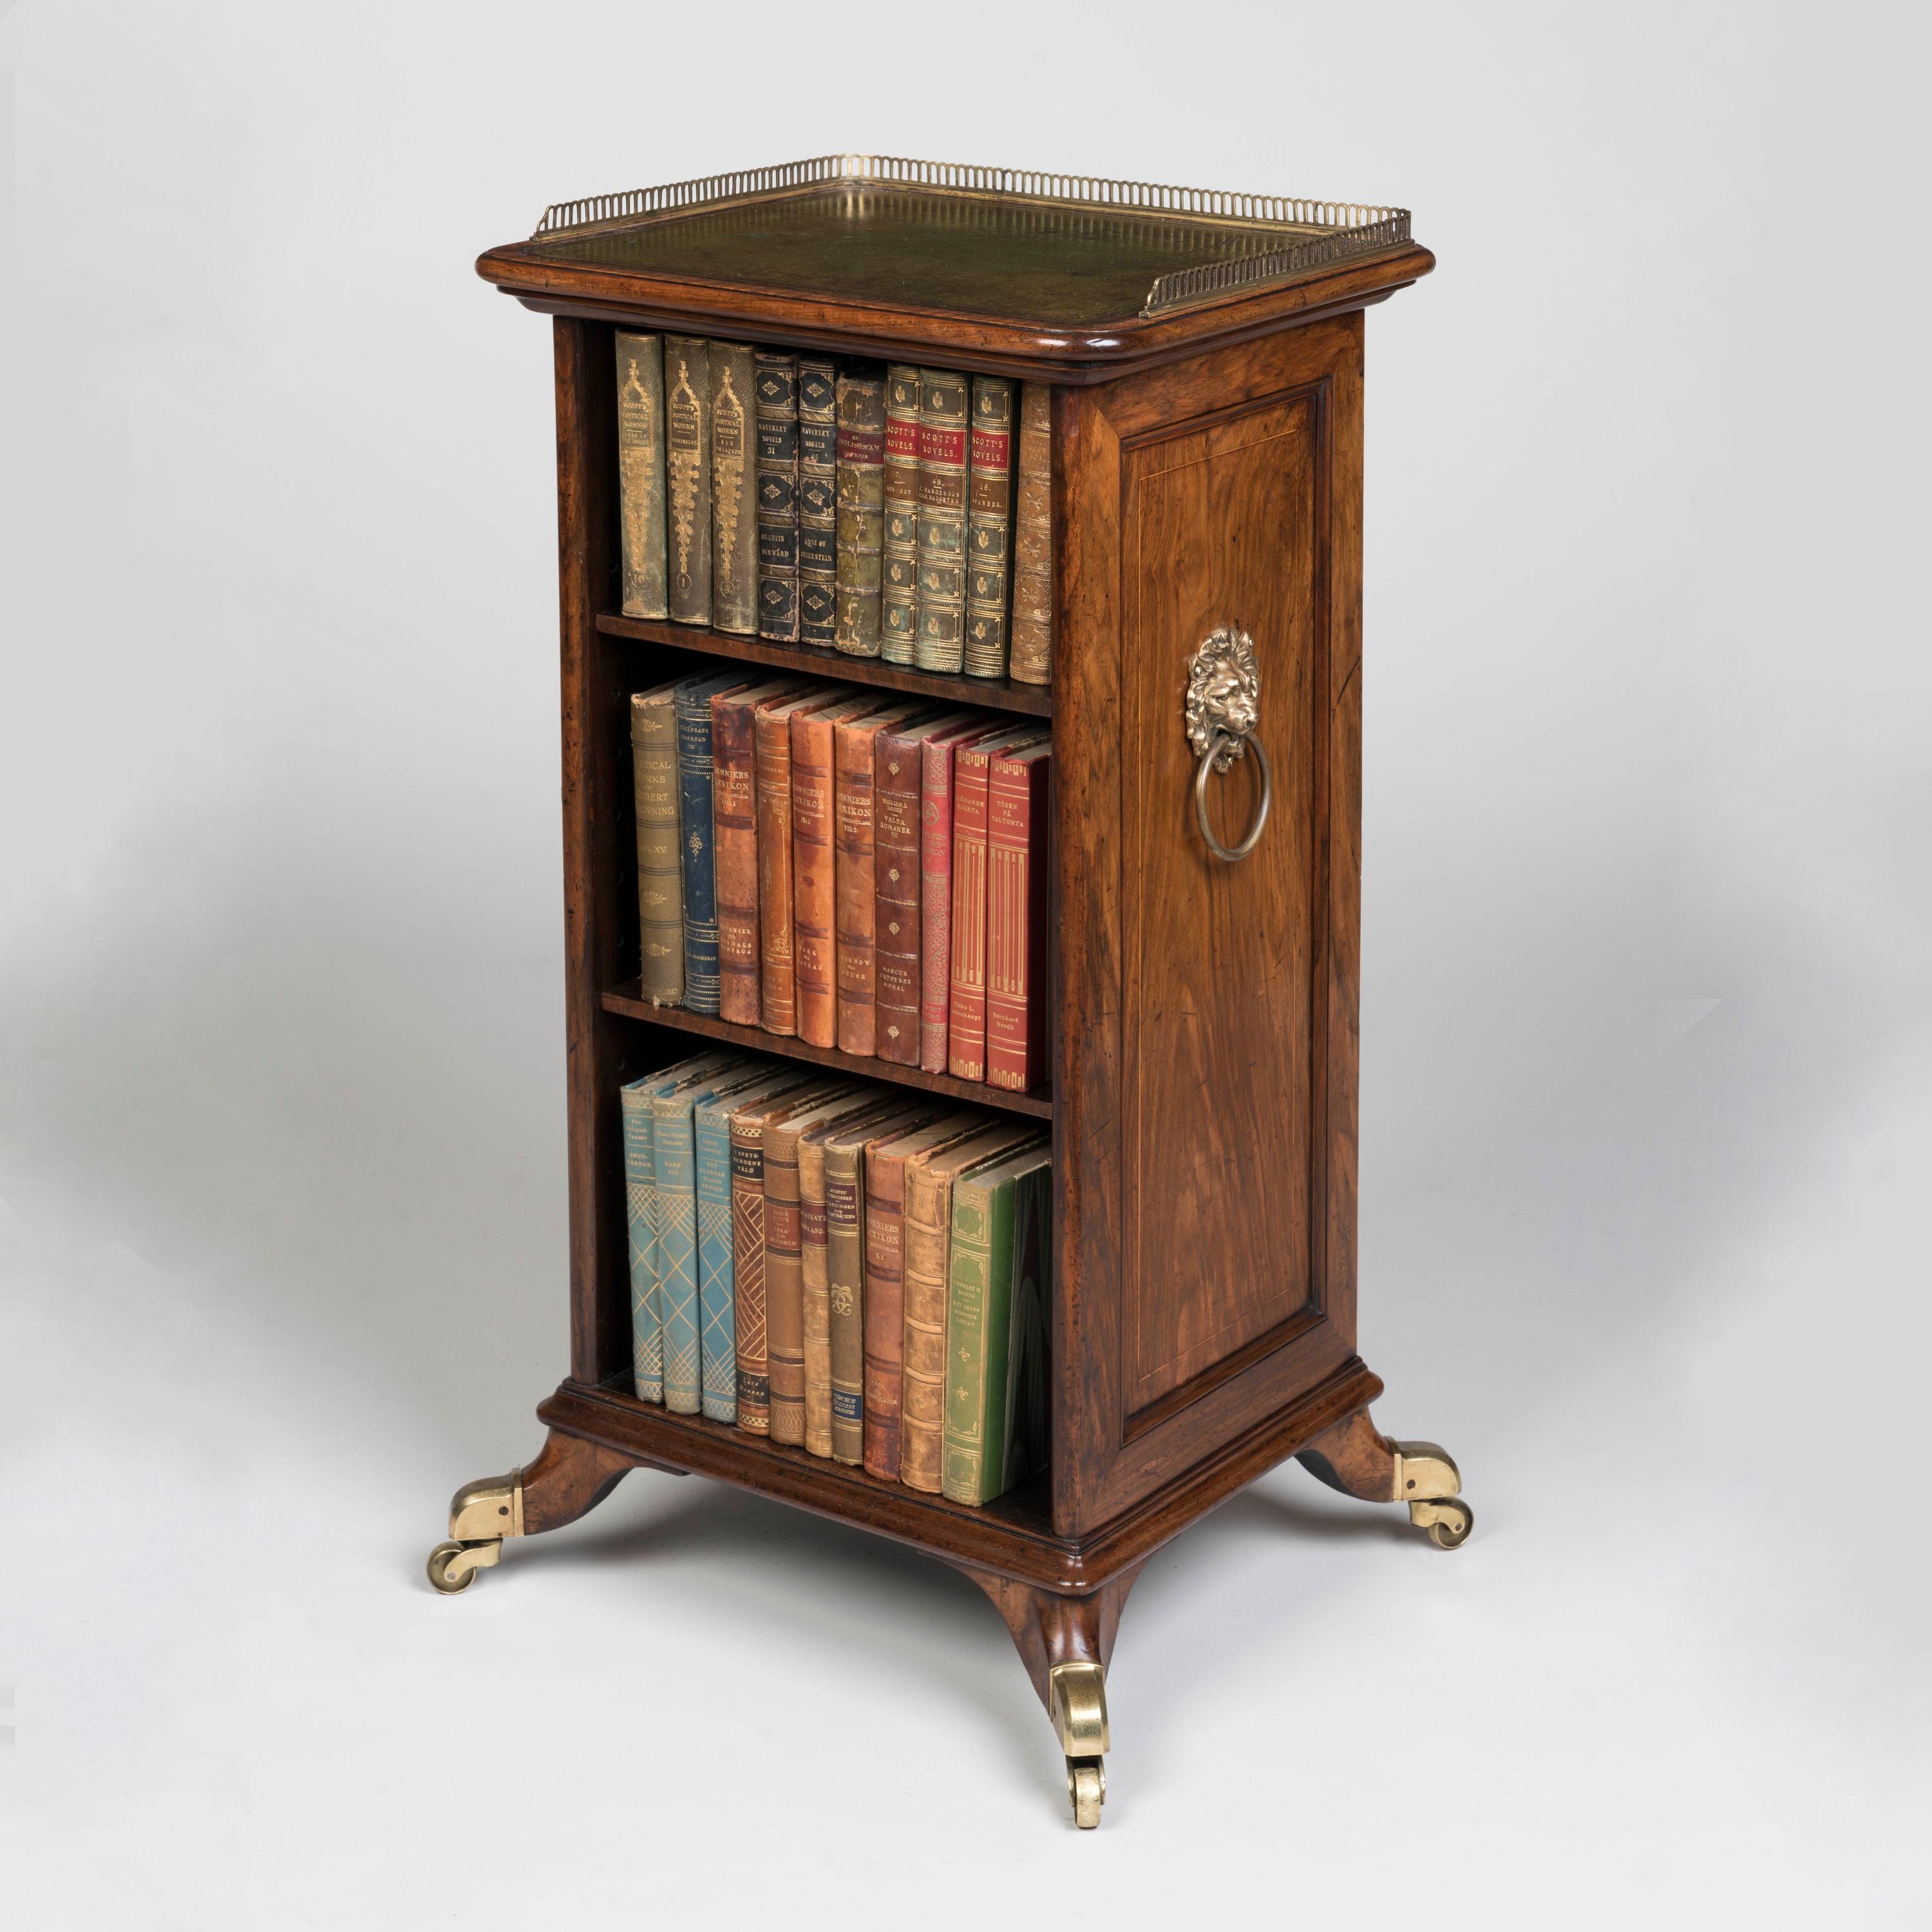 A Rare Regency Period Free-Standing bookcase

Constructed from walnut, supported on brass castors and splayed legs, with one open side fitted with two shelves; the back fitted with a brass grille and silk fabric dustcover while the sides are